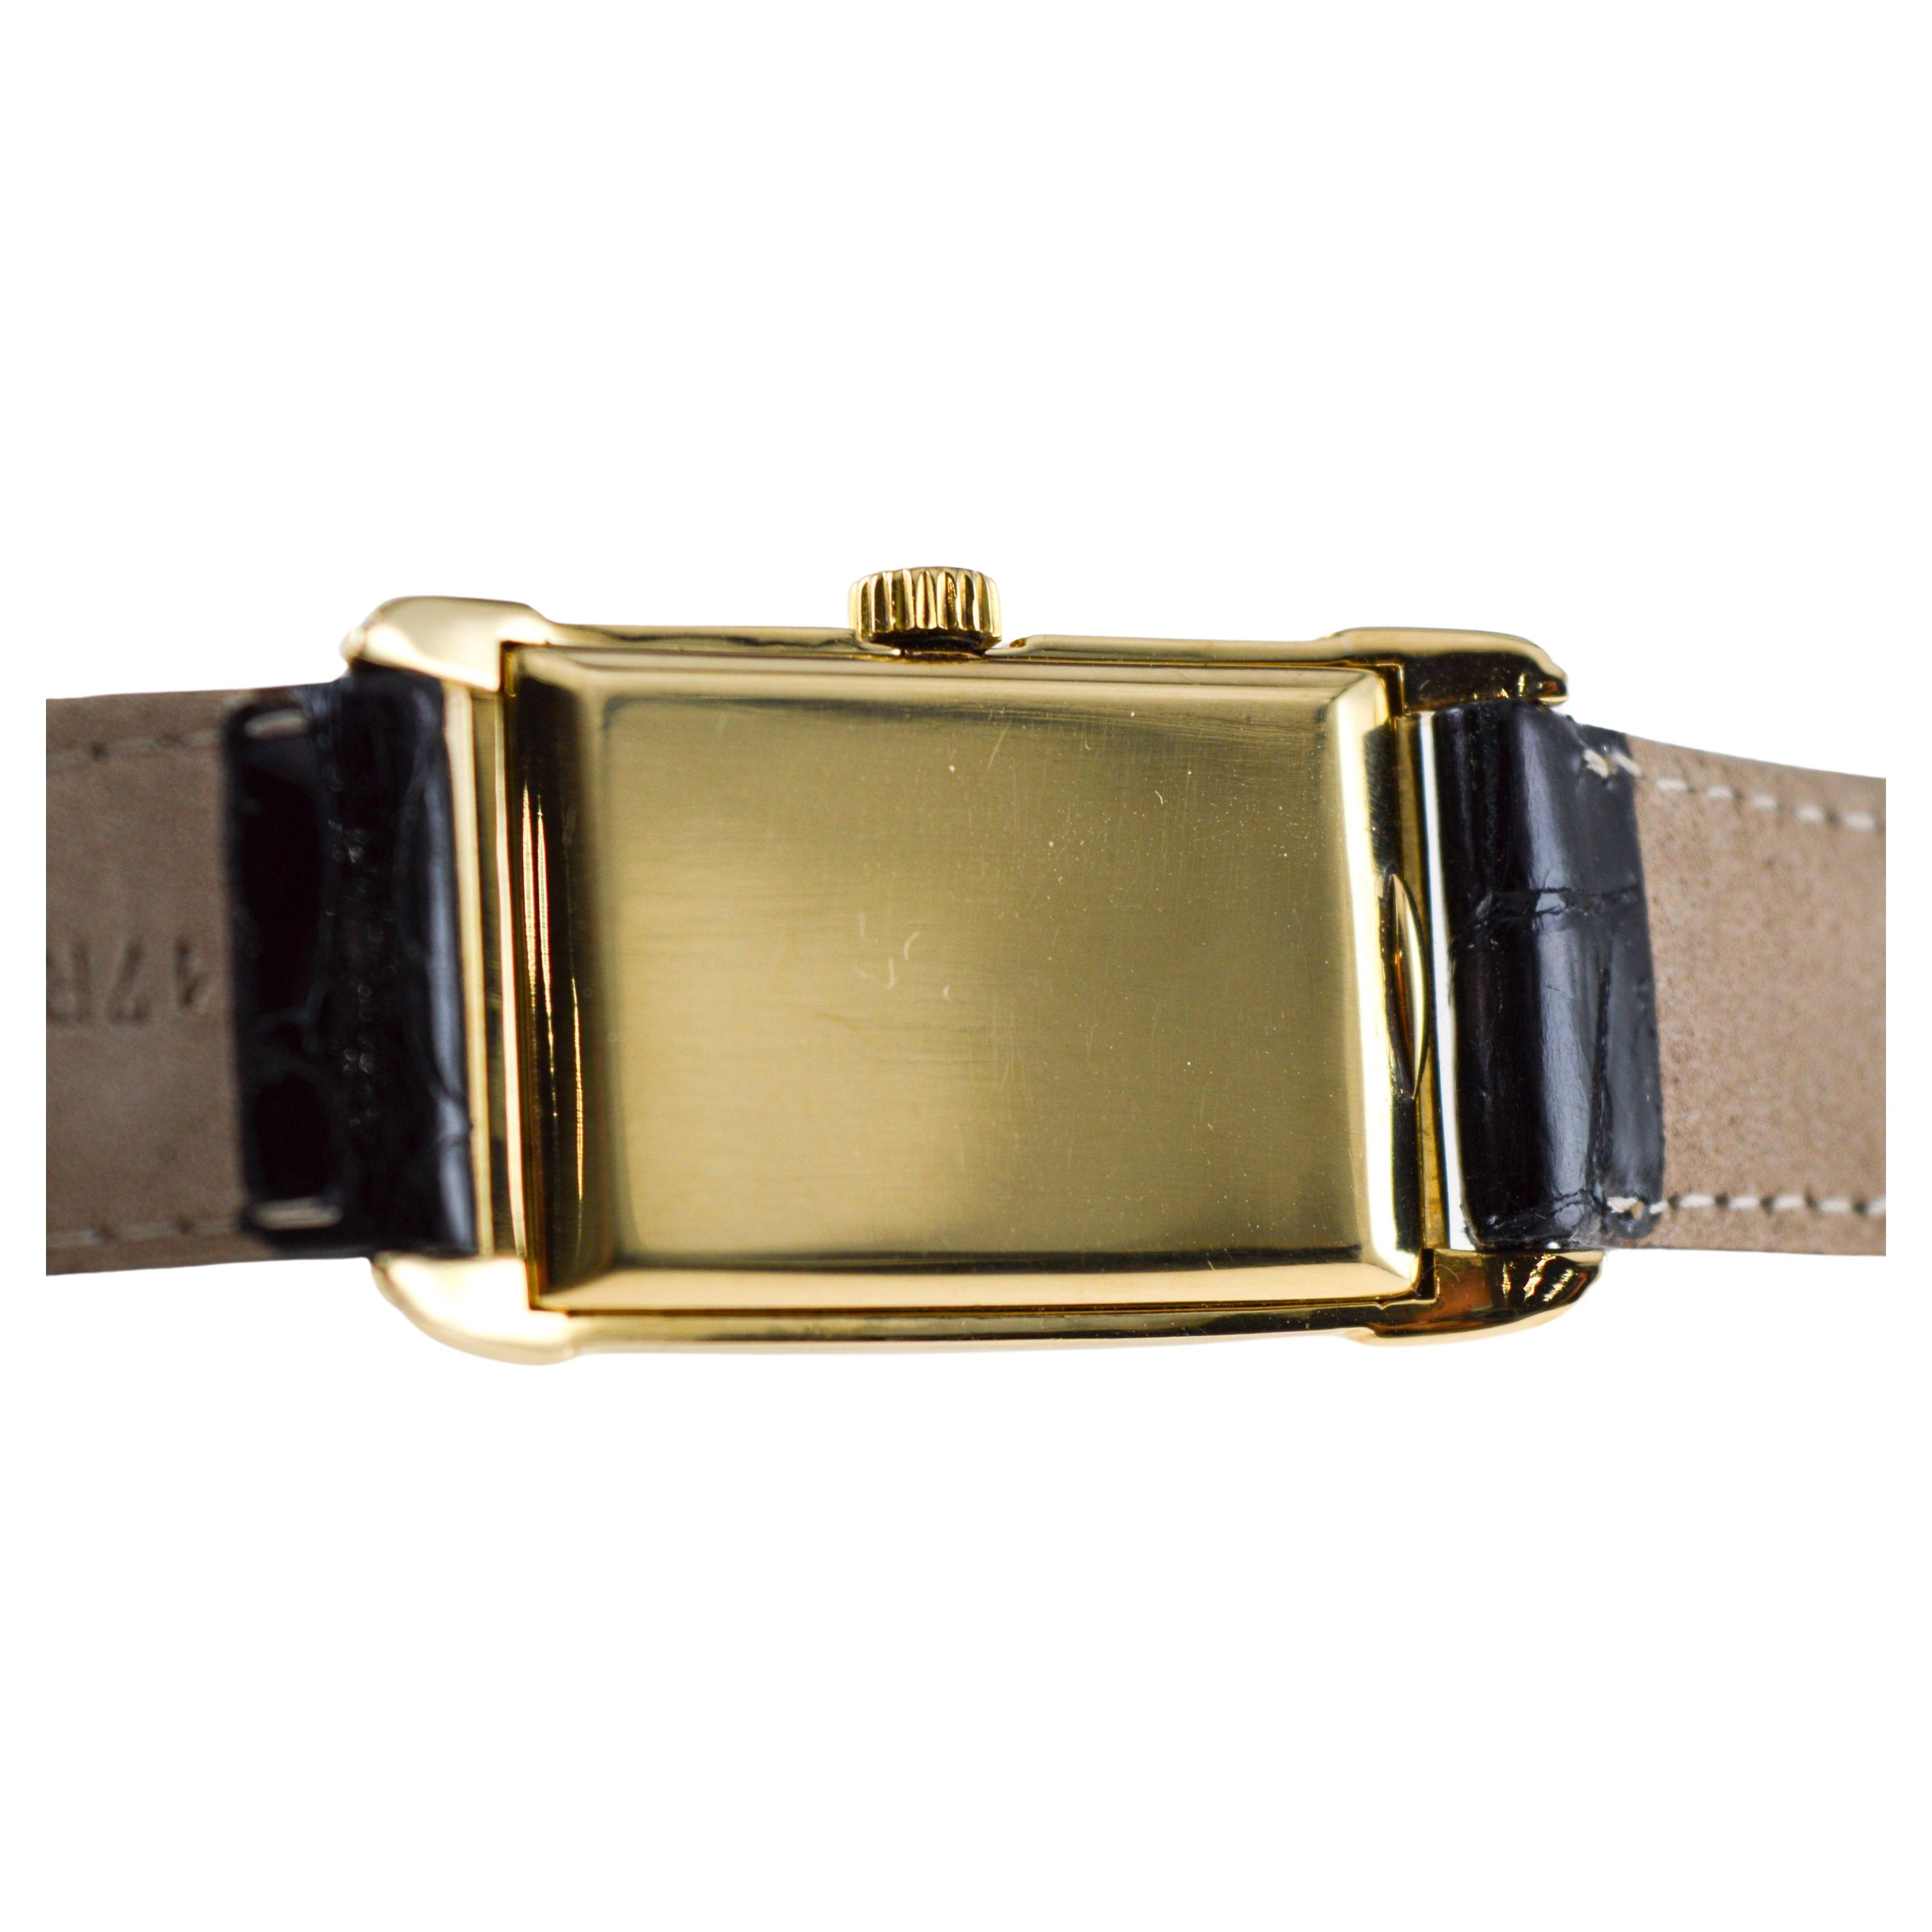 Patek Philippe Yellow Gold Art Deco Style Manual Watch, circa 1948 with Archival For Sale 8